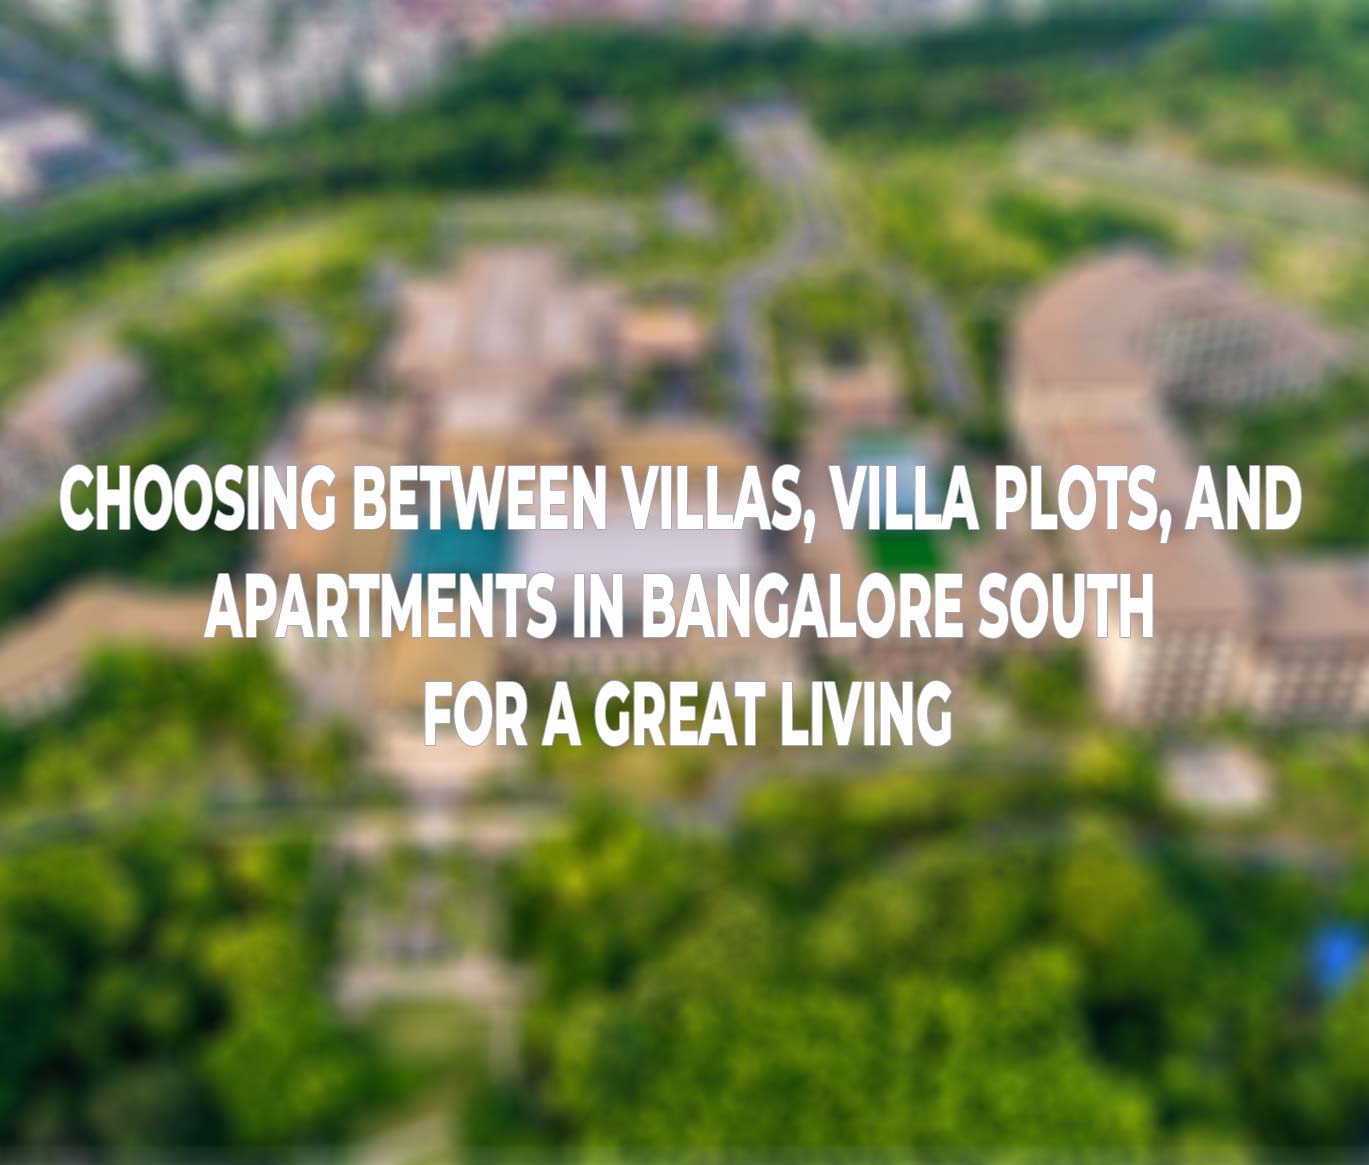 Choosing Between Villas, Villa Plots, and Apartments in Bangalore South for a great Living